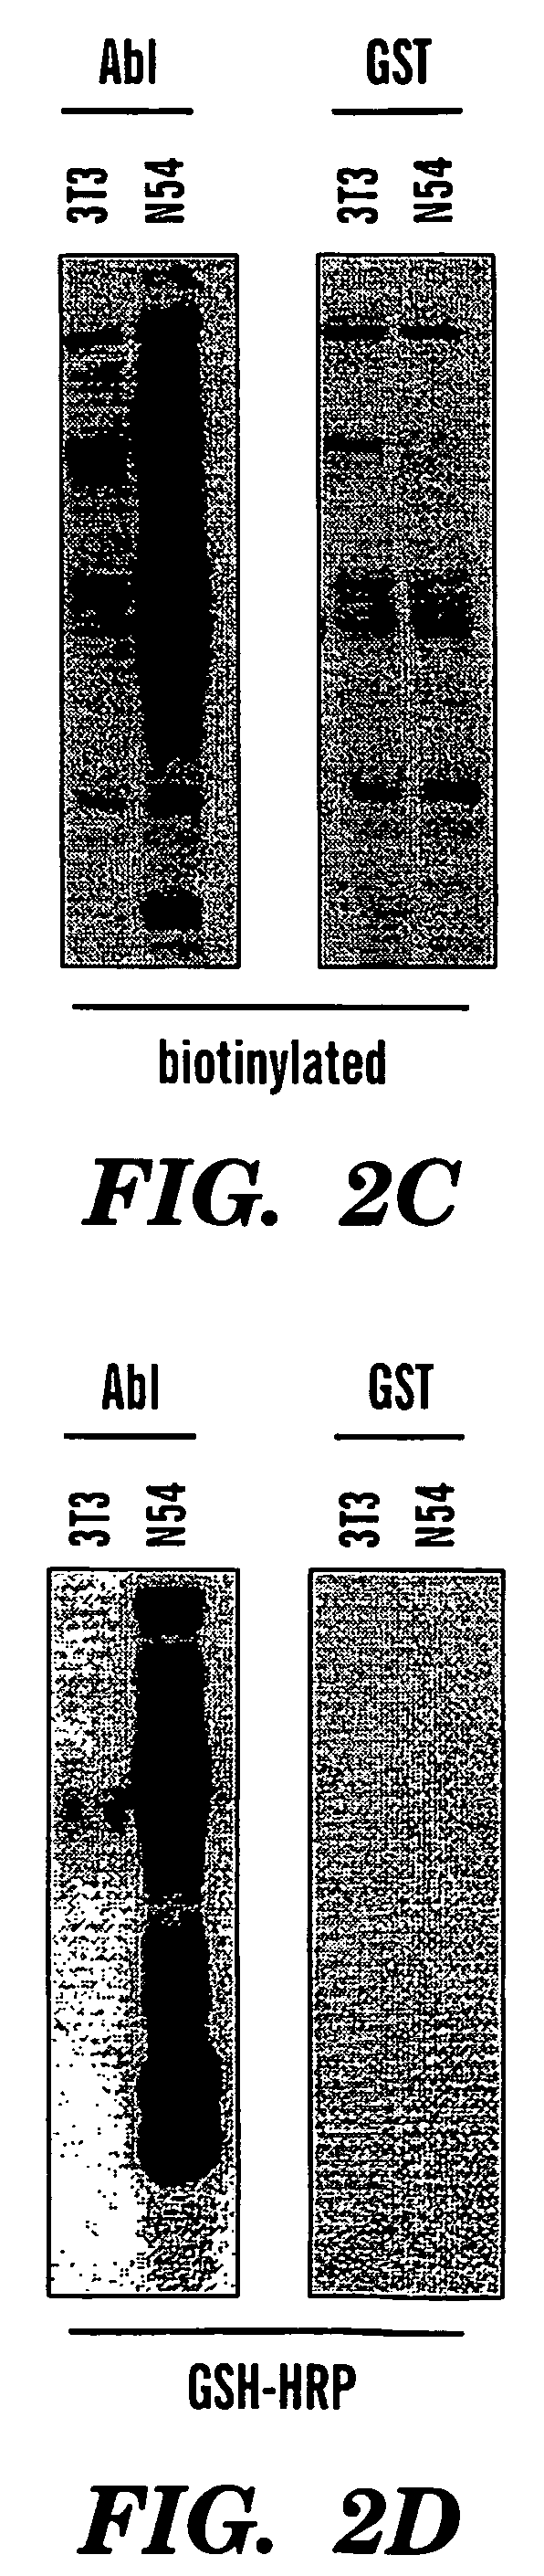 Methods of analysis and labeling of protein-protein interactions